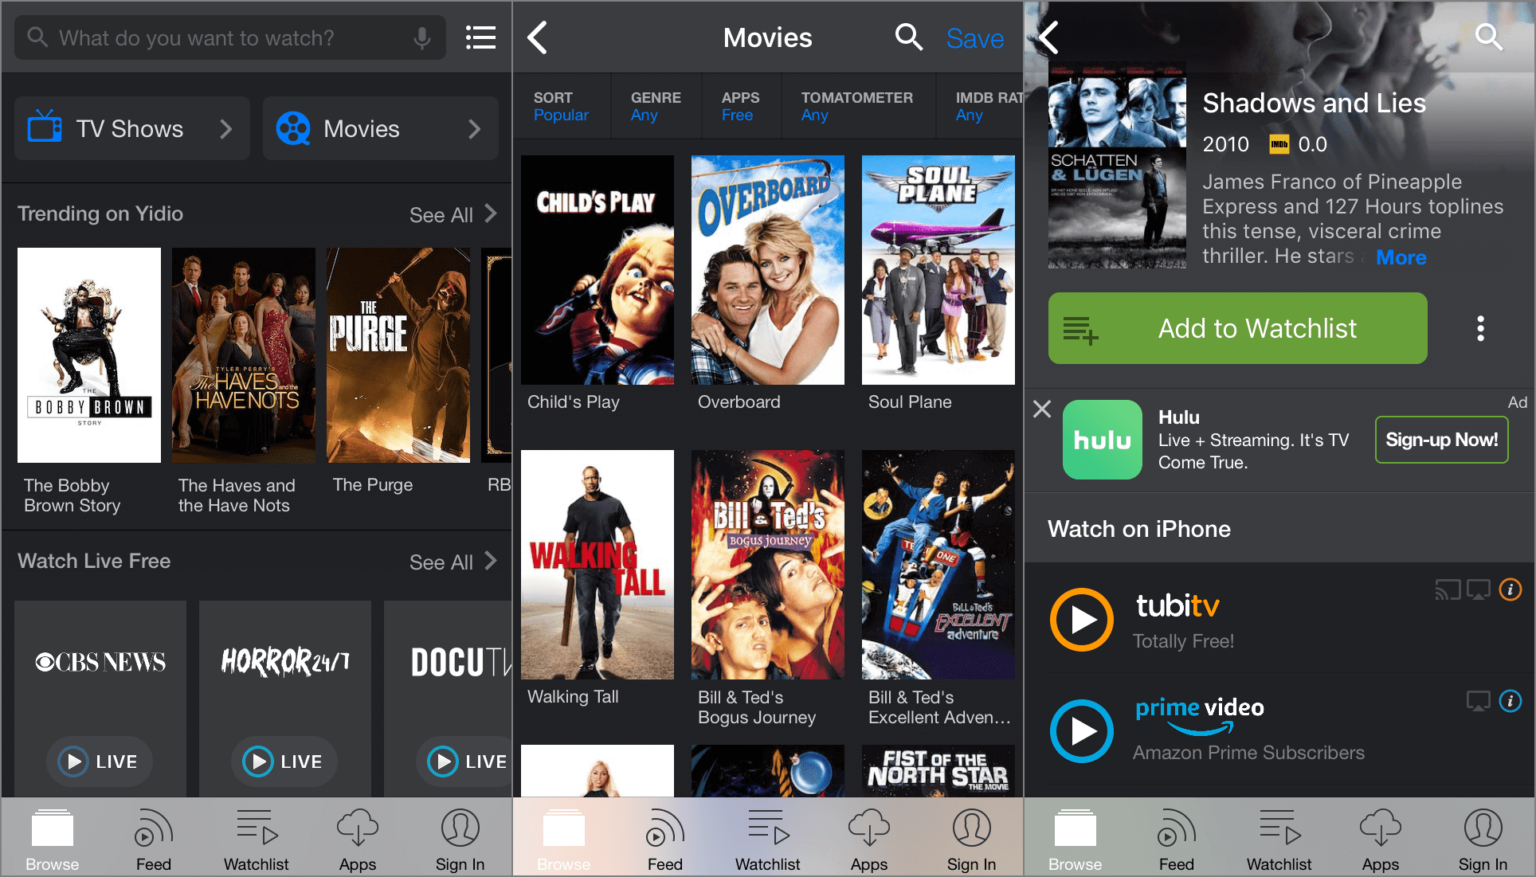 7 Best Movies Apps for Android like Showbox - DroidViews cinema hd v2 free movies app